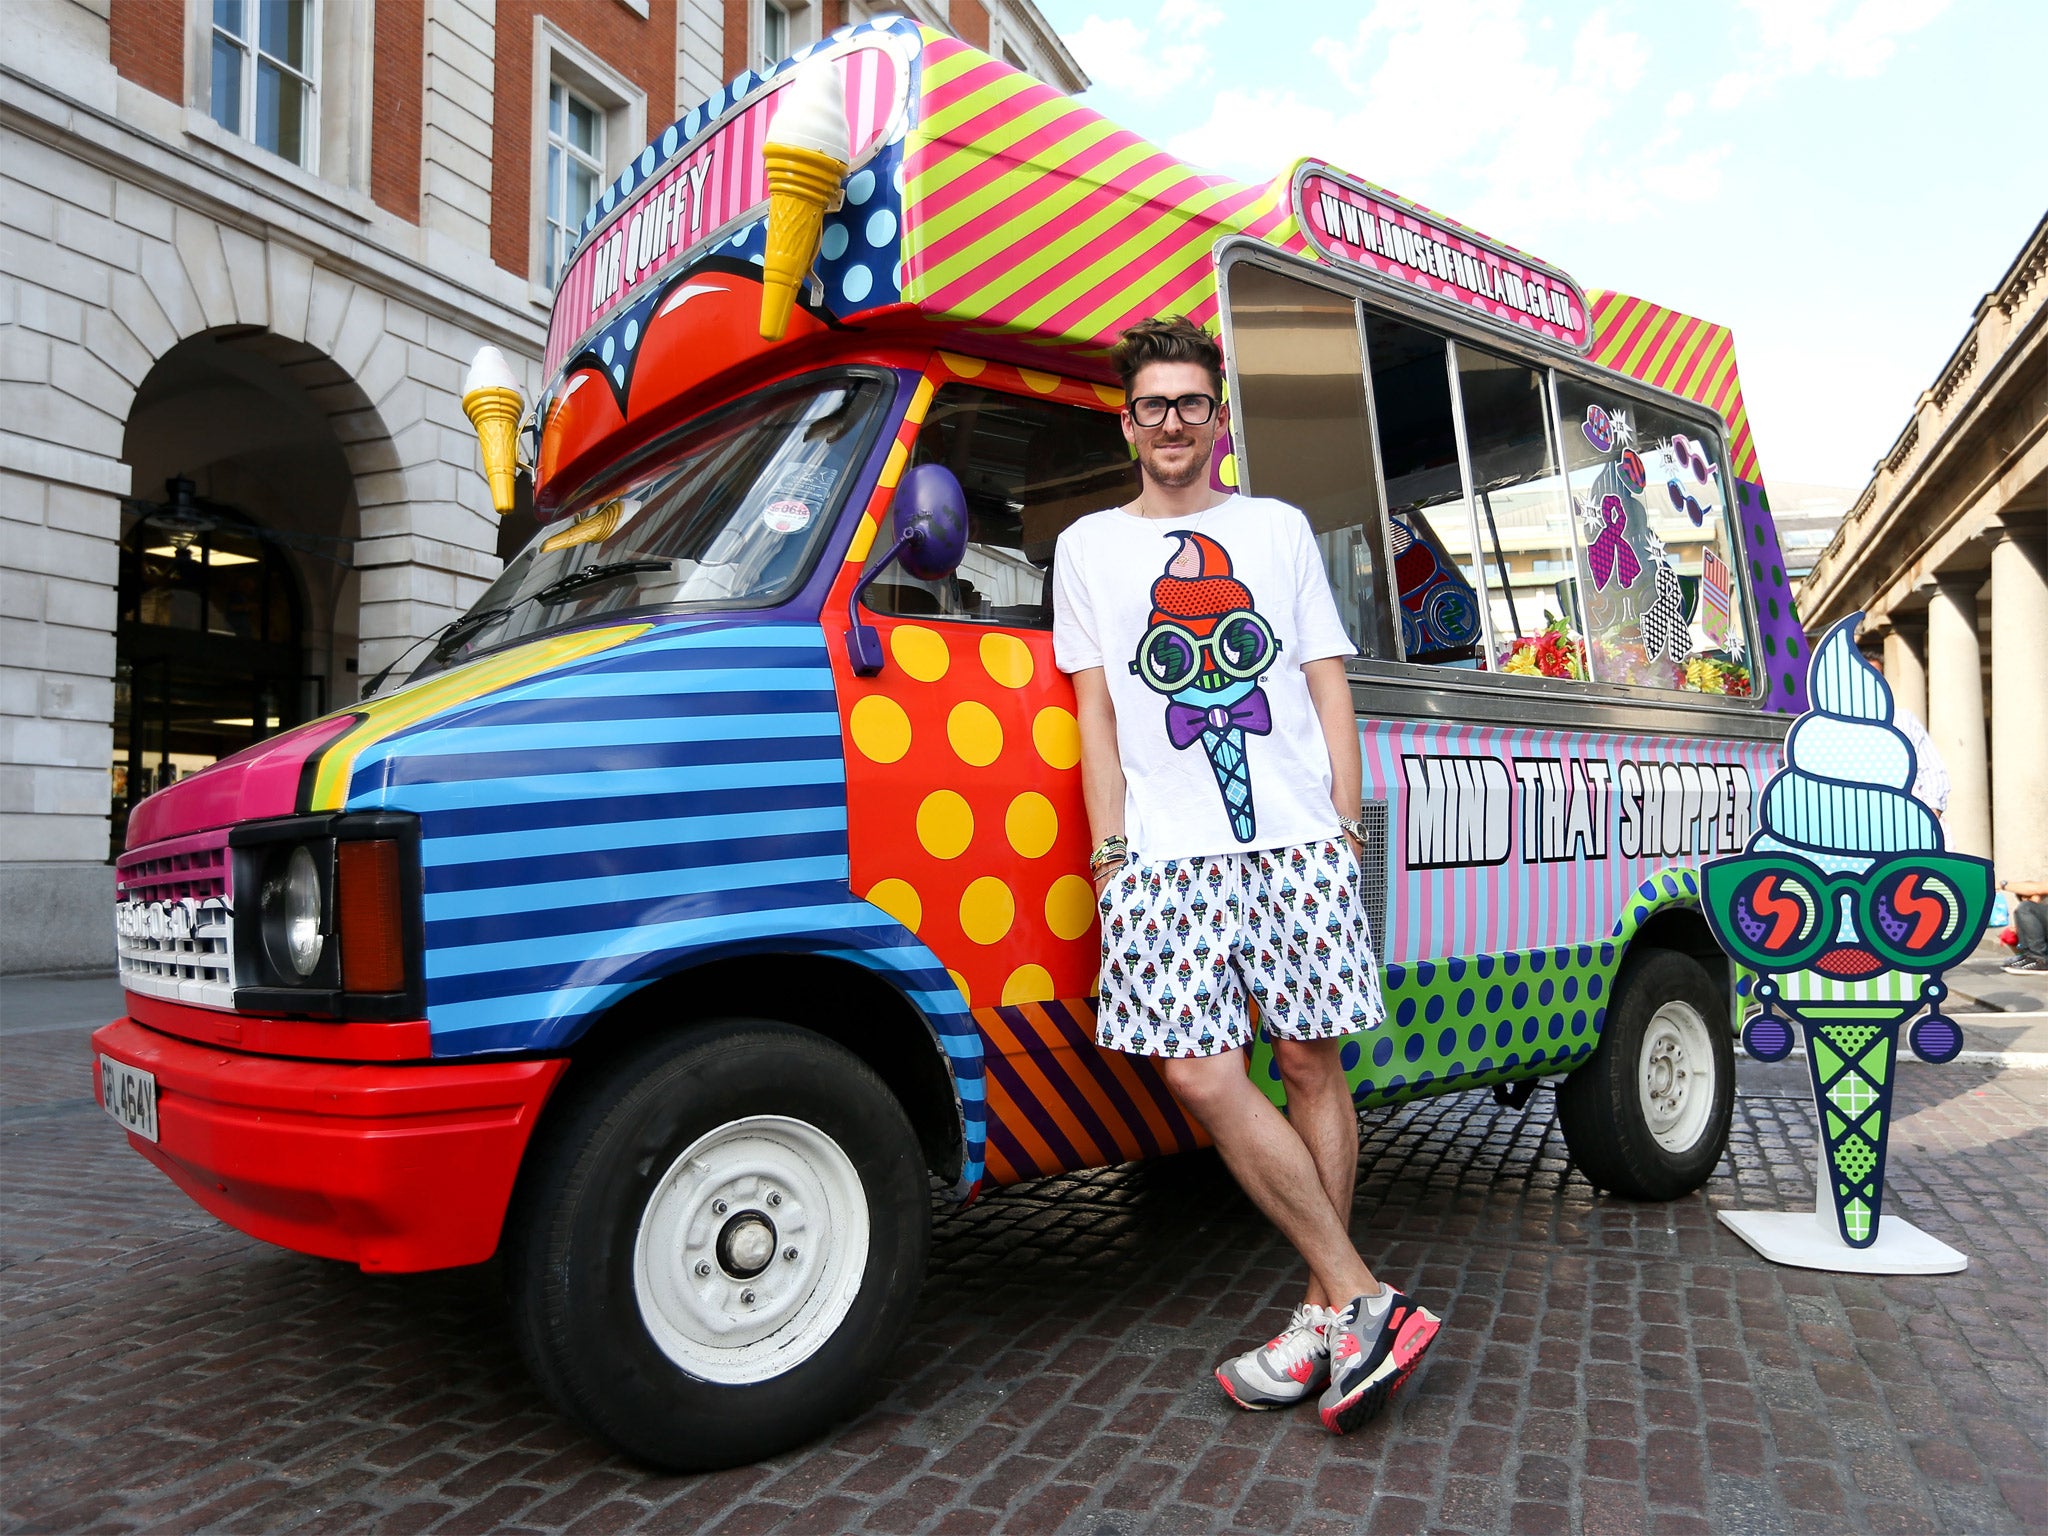 The fashion designer Henry Holland has transformed a former ice-cream van, into his new flagship store. Instead of cones and lollies he will sell House of Holland clothes